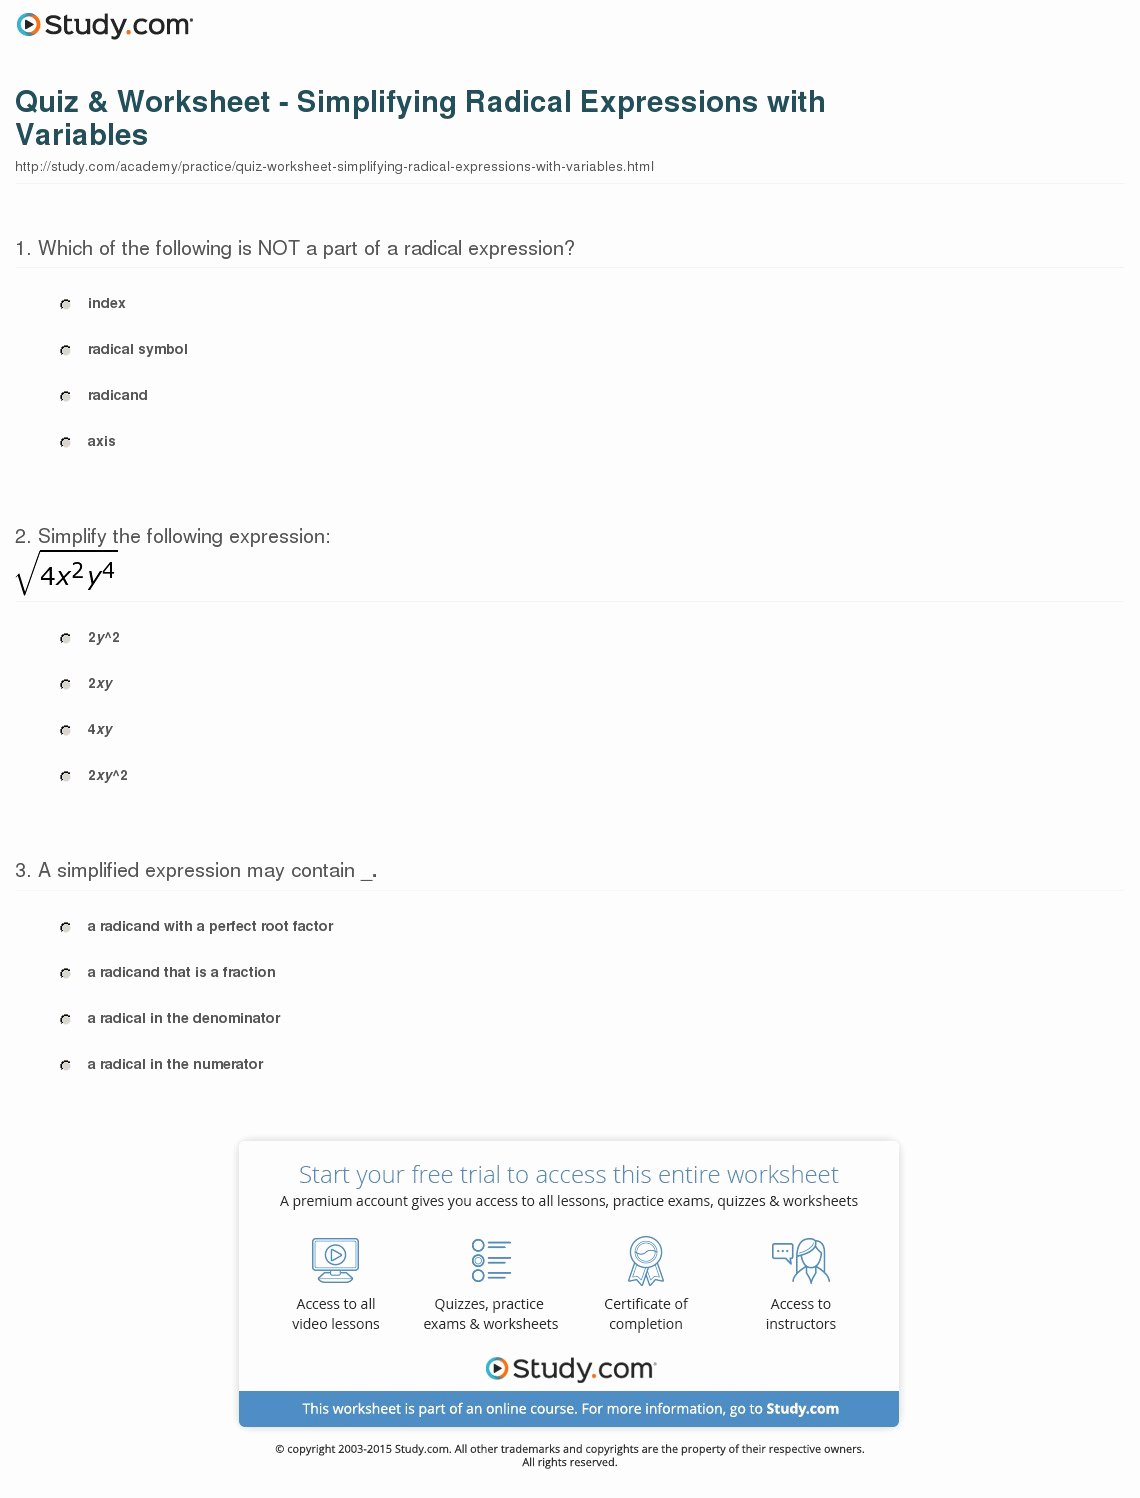 Simplifying Radicals with Variables Worksheet Luxury Quiz &amp; Worksheet Simplifying Radical Expressions with